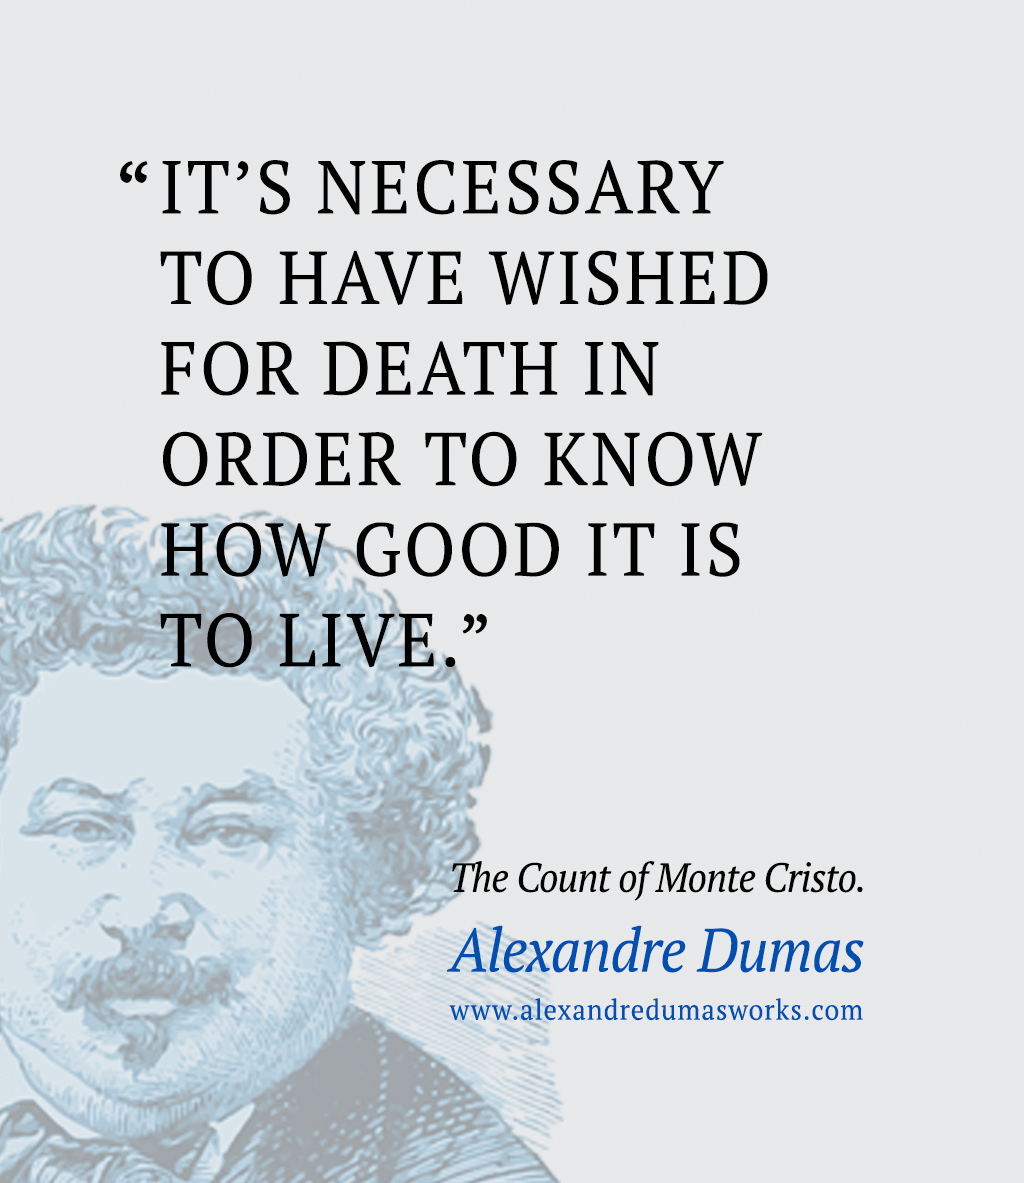 “It's necessary to have wished for death in order to know how good it is to live.” ― Alexandre Dumas, The Count of Monte Cristo